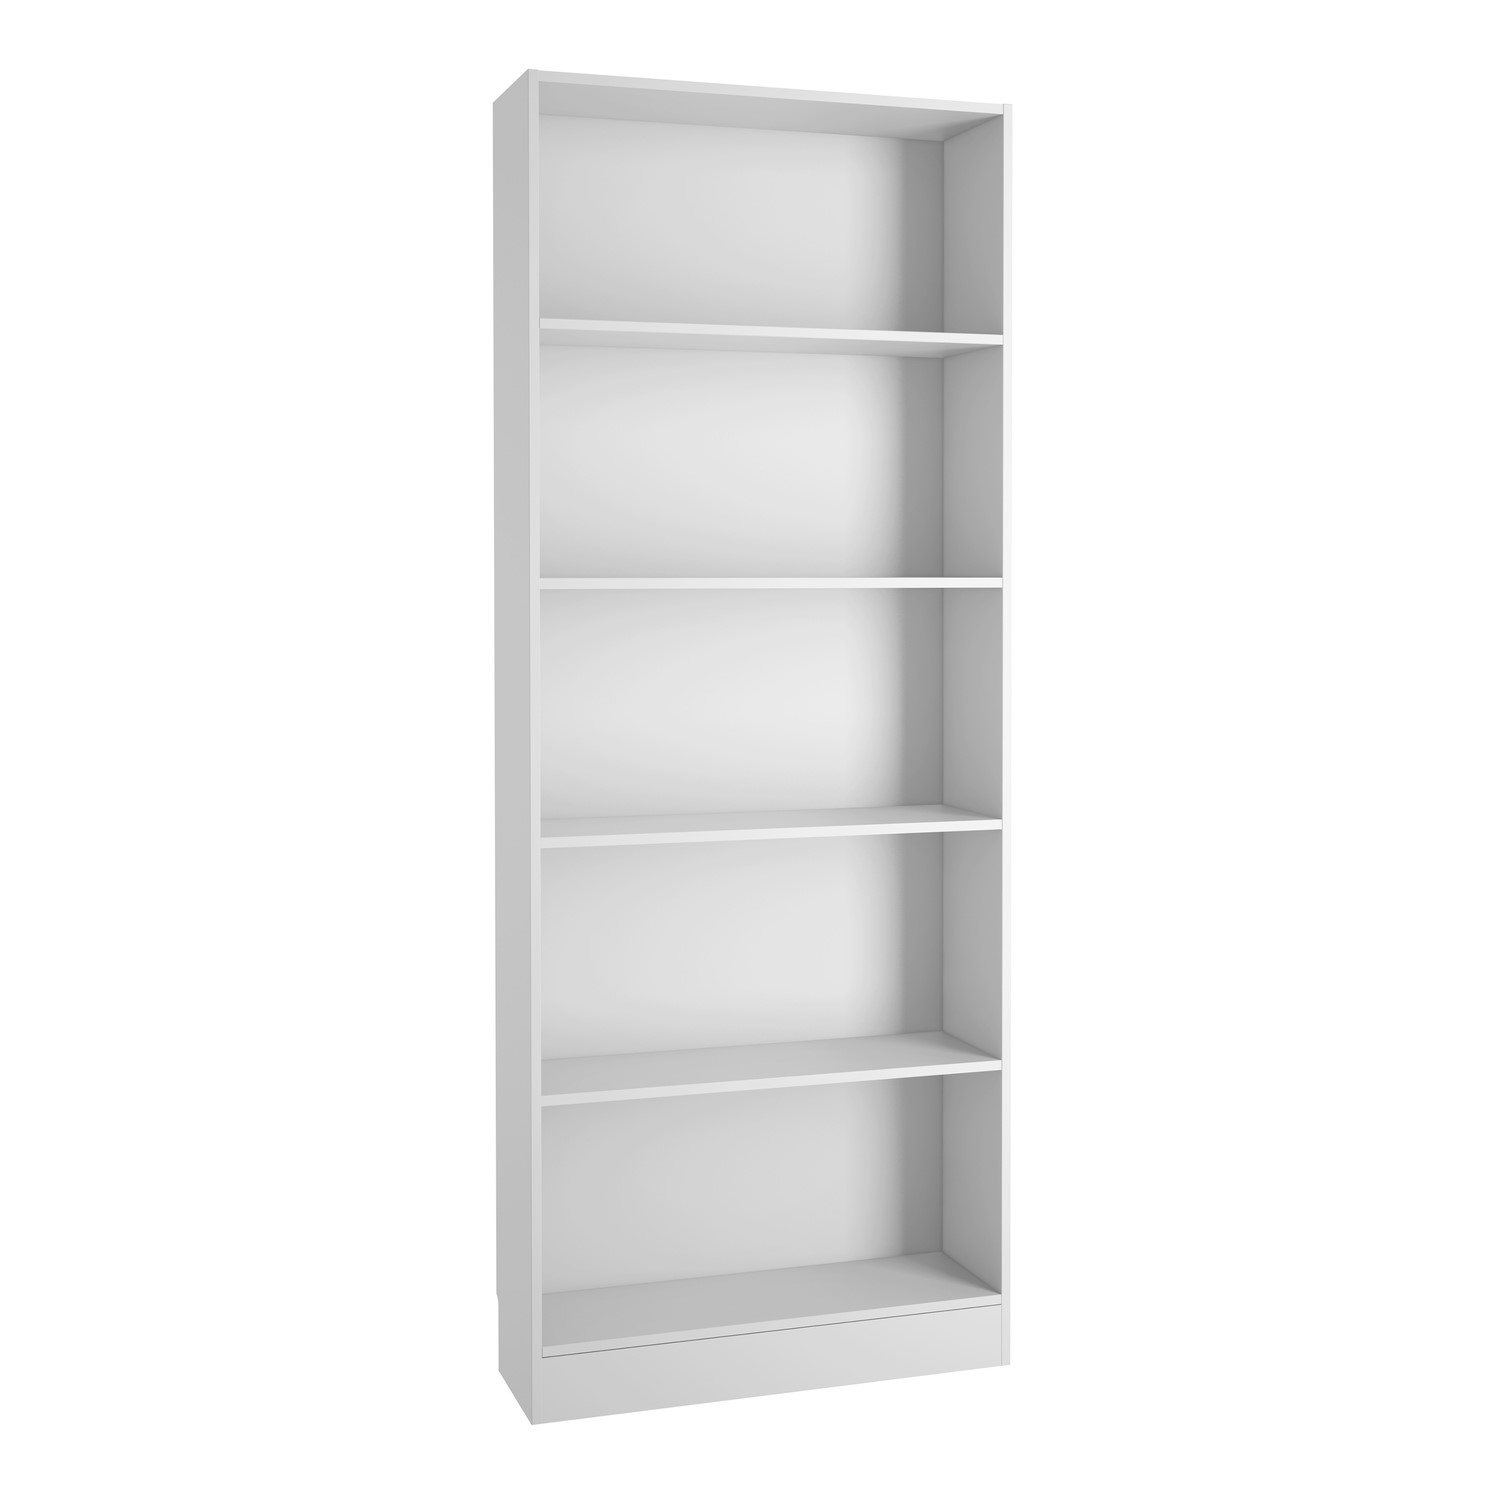 Read more about Tall and wide white bookcase basic